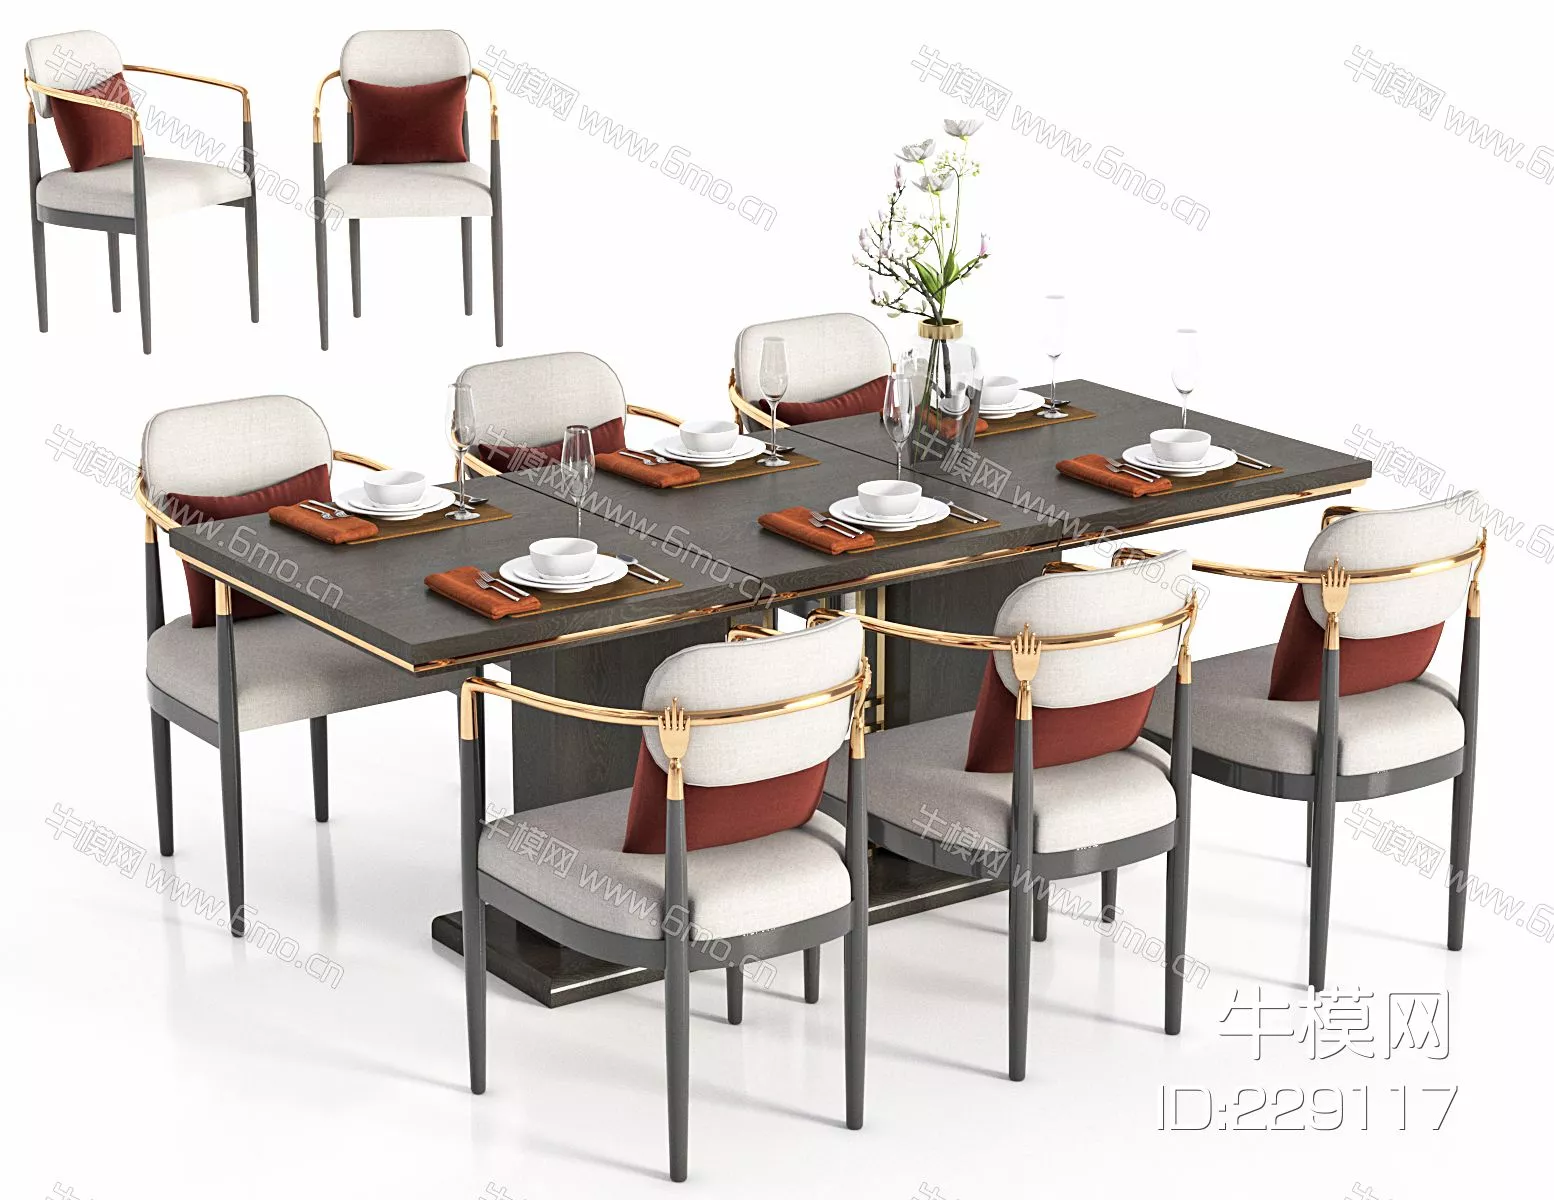 CHINESE DINING TABLE SET - SKETCHUP 3D MODEL - VRAY - 229117